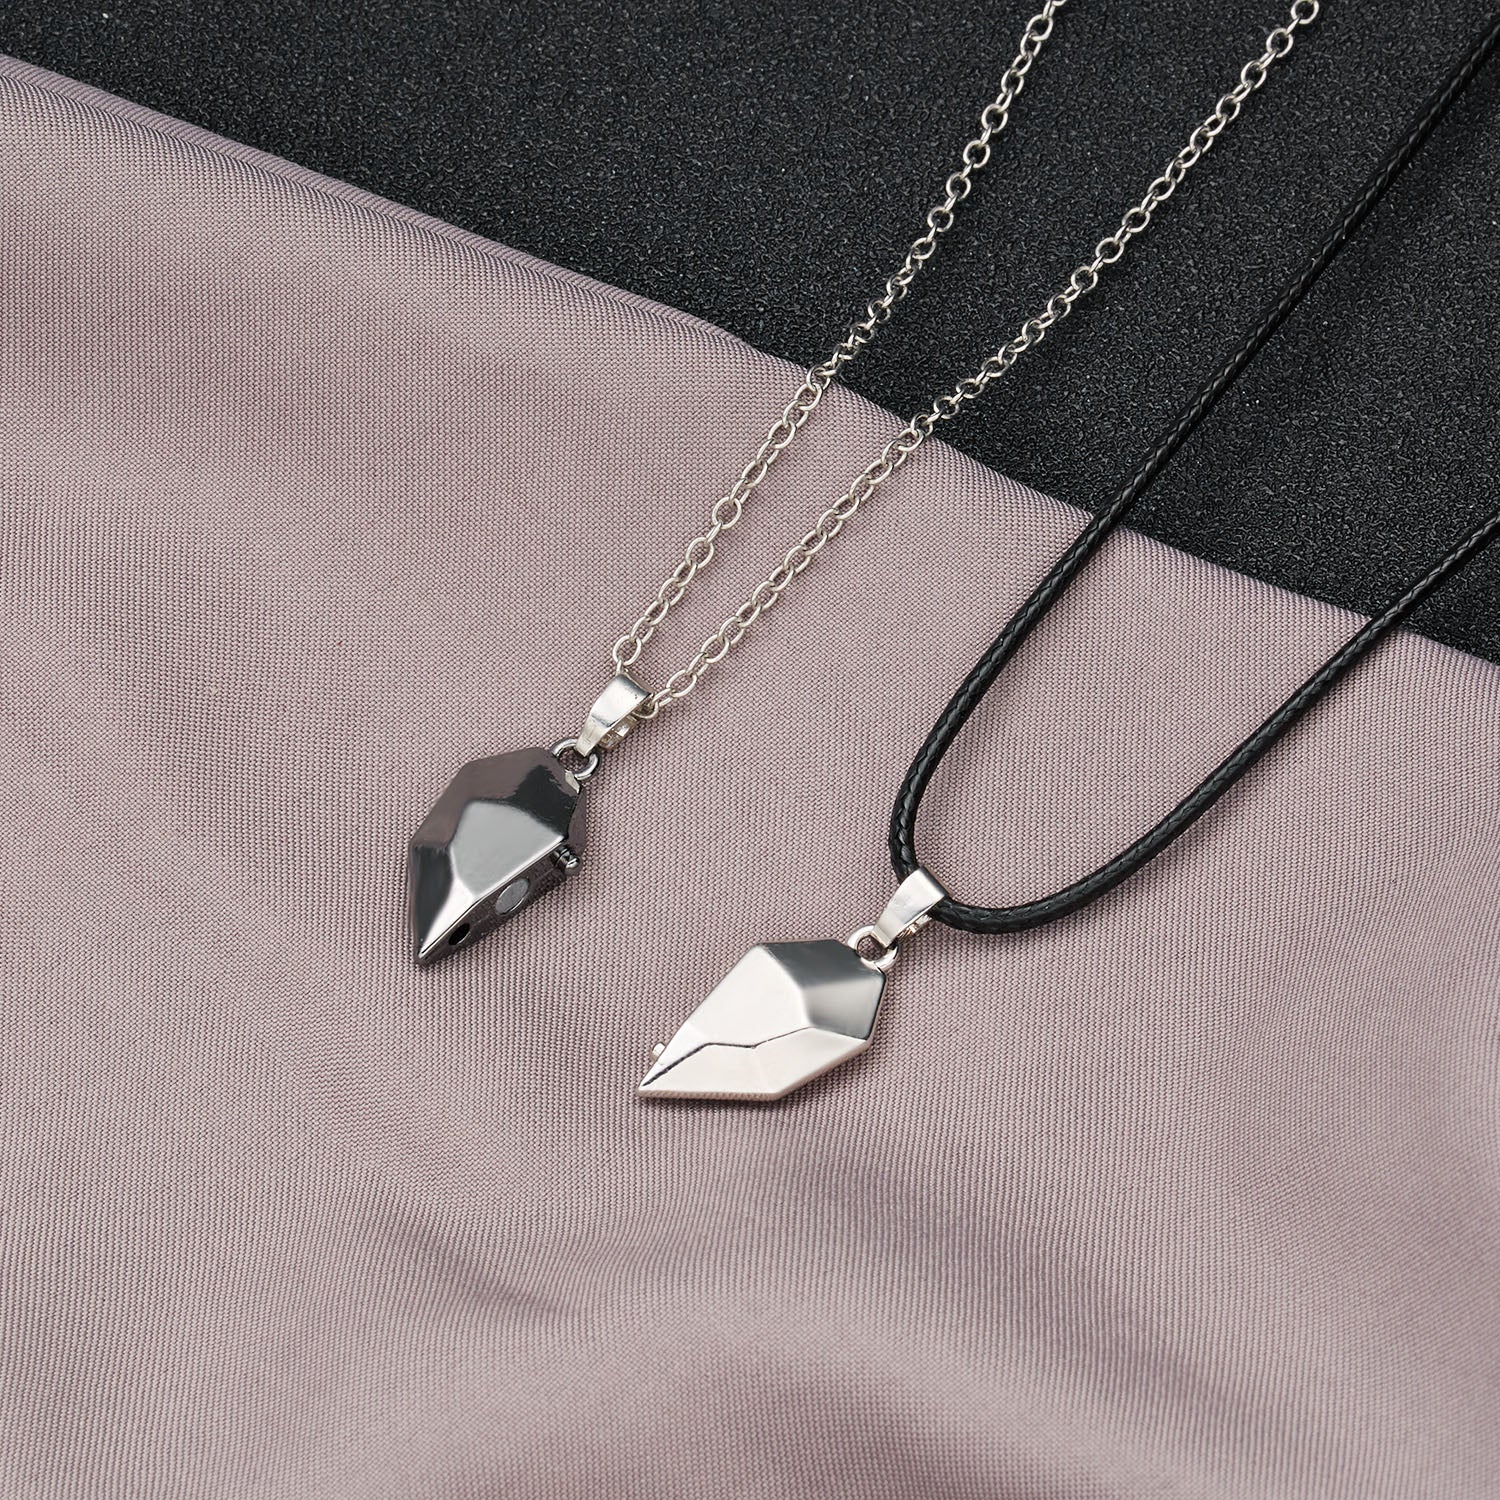 Magnetic Heart Necklace (2)